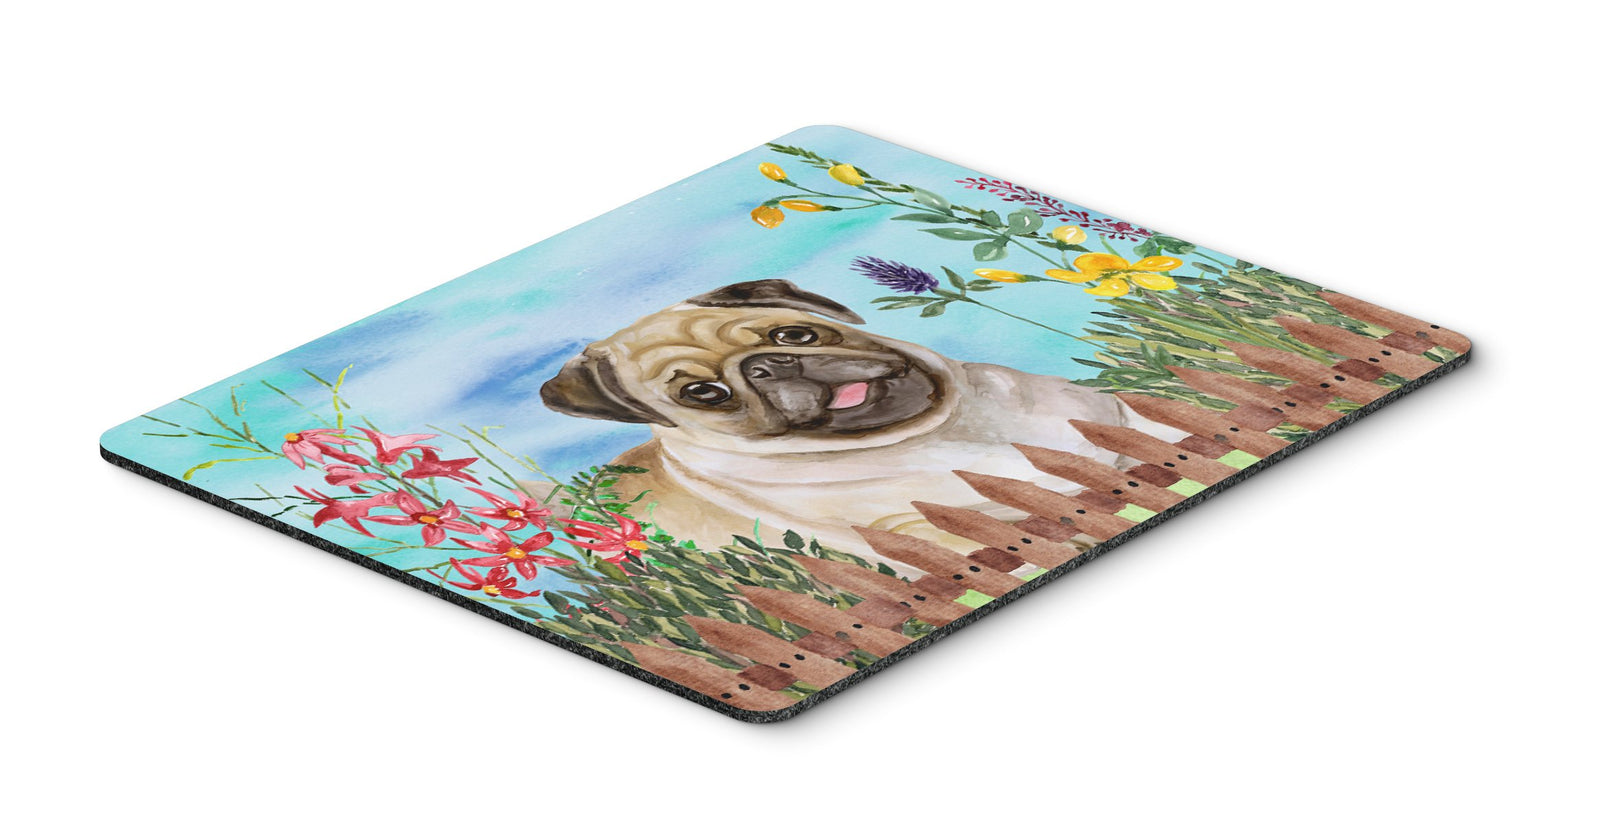 Fawn Pug Spring Mouse Pad, Hot Pad or Trivet CK1280MP by Caroline's Treasures